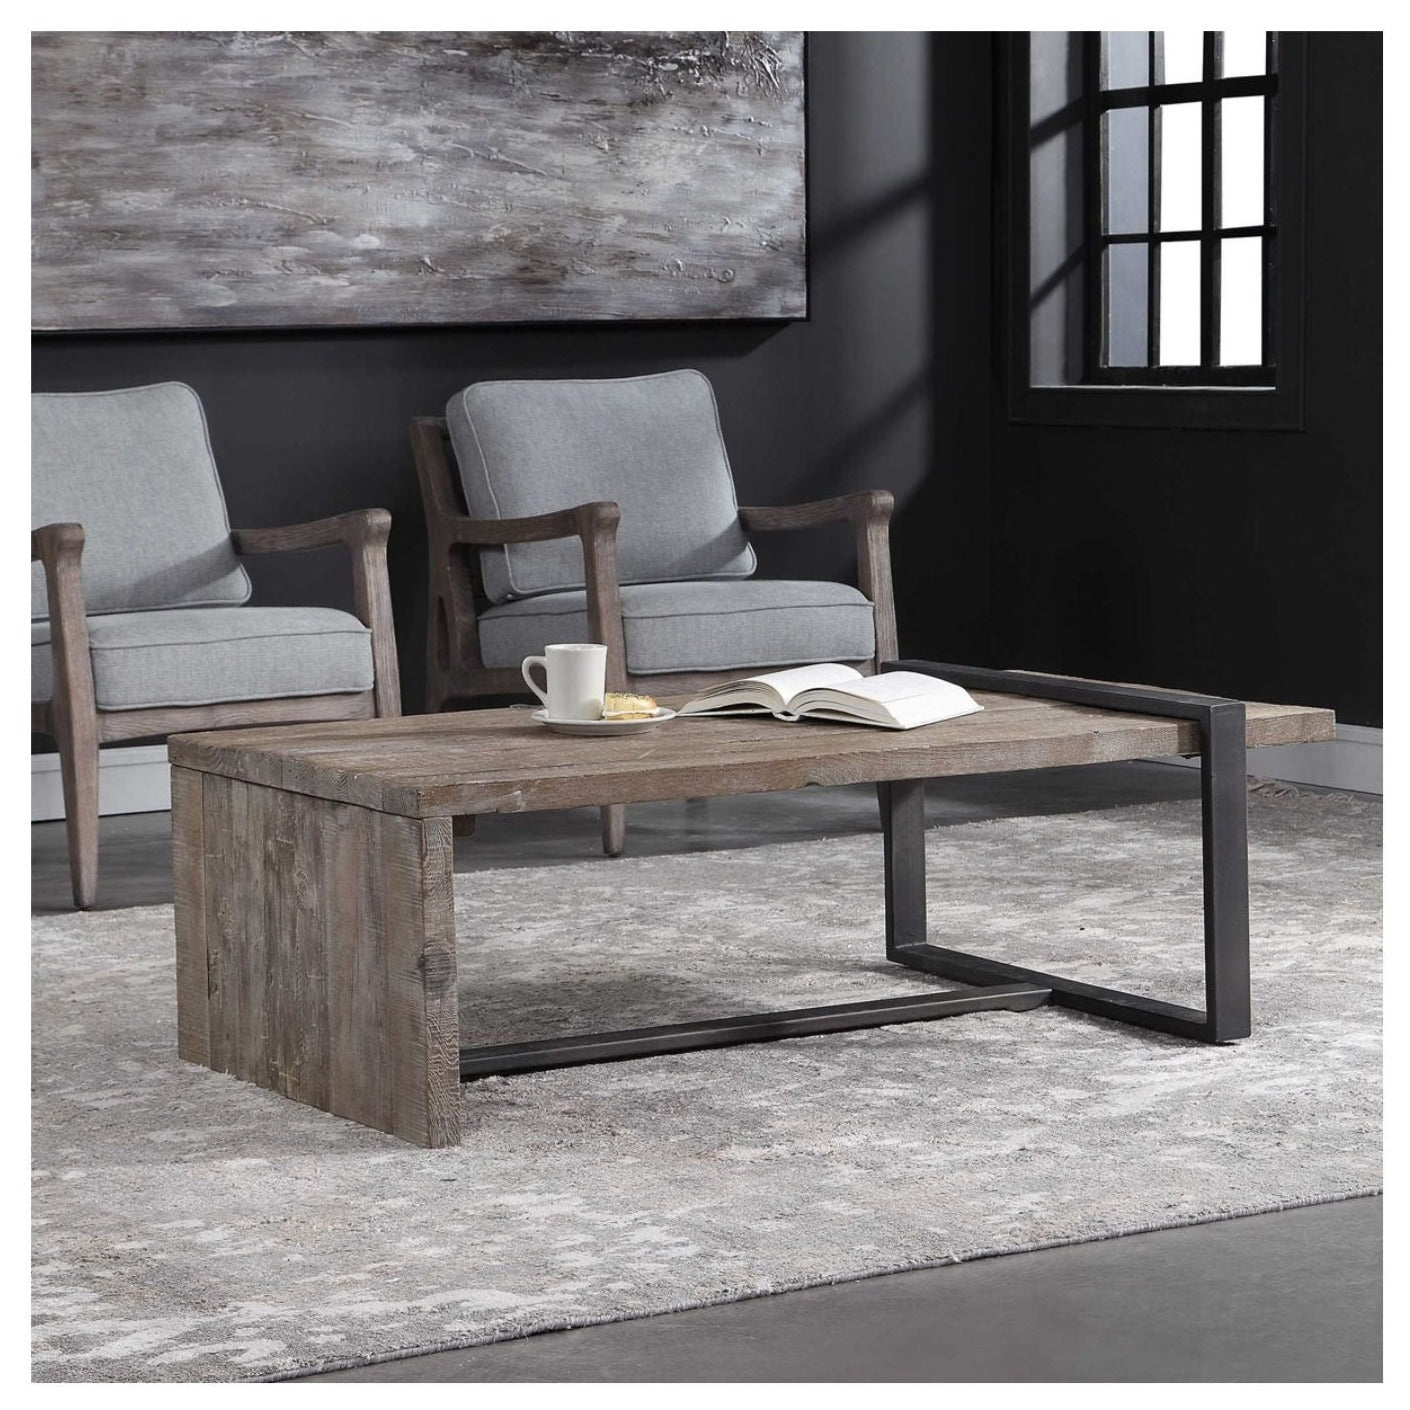 This shows this reclaimed wood and iron rectangle coffee table in a room setting with chairs and art in background.